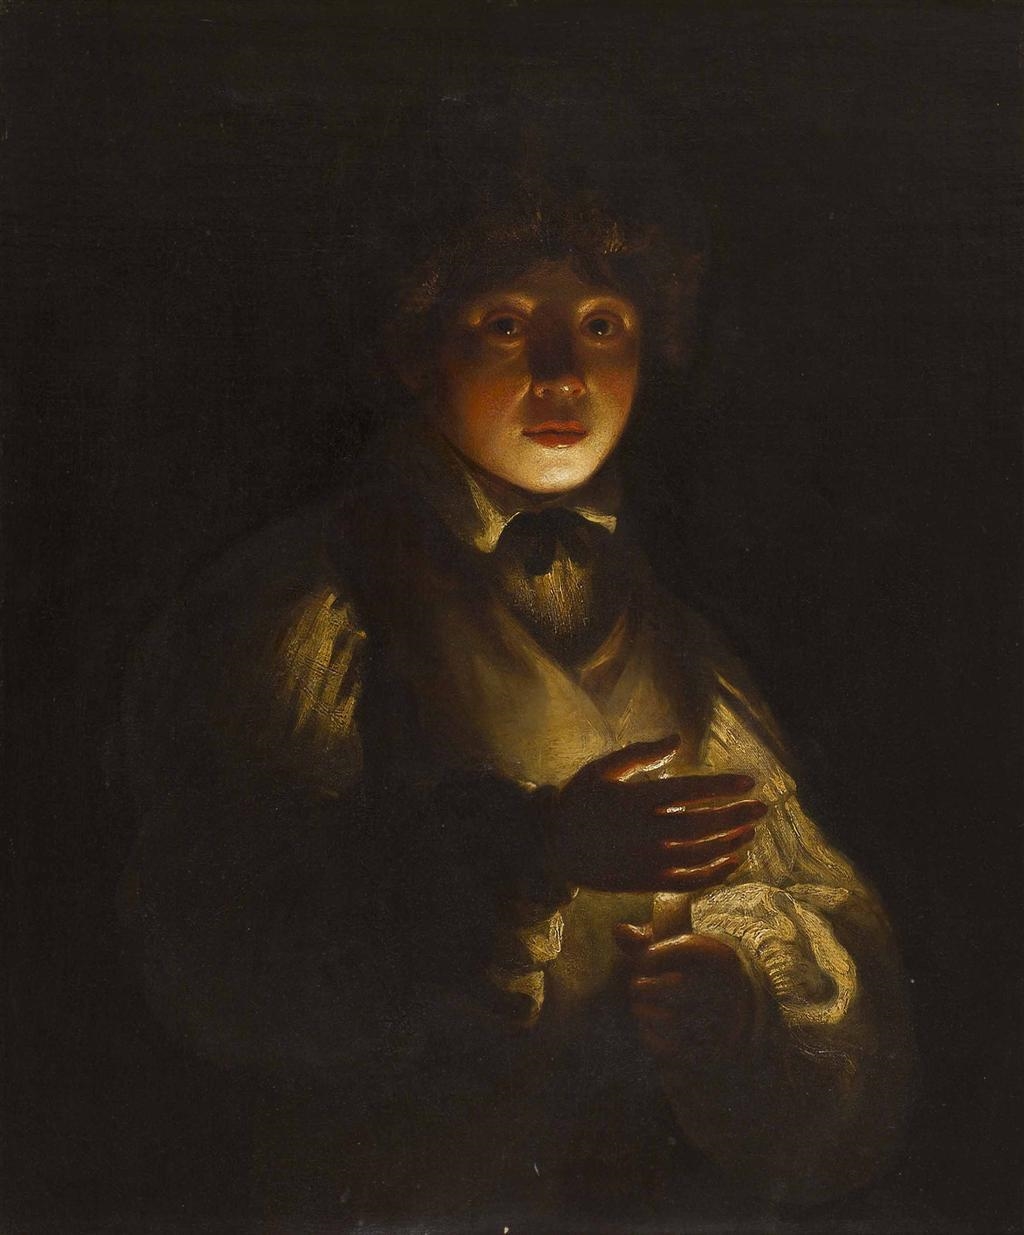 Caravaggio | Boy by Candlelight | MutualArt